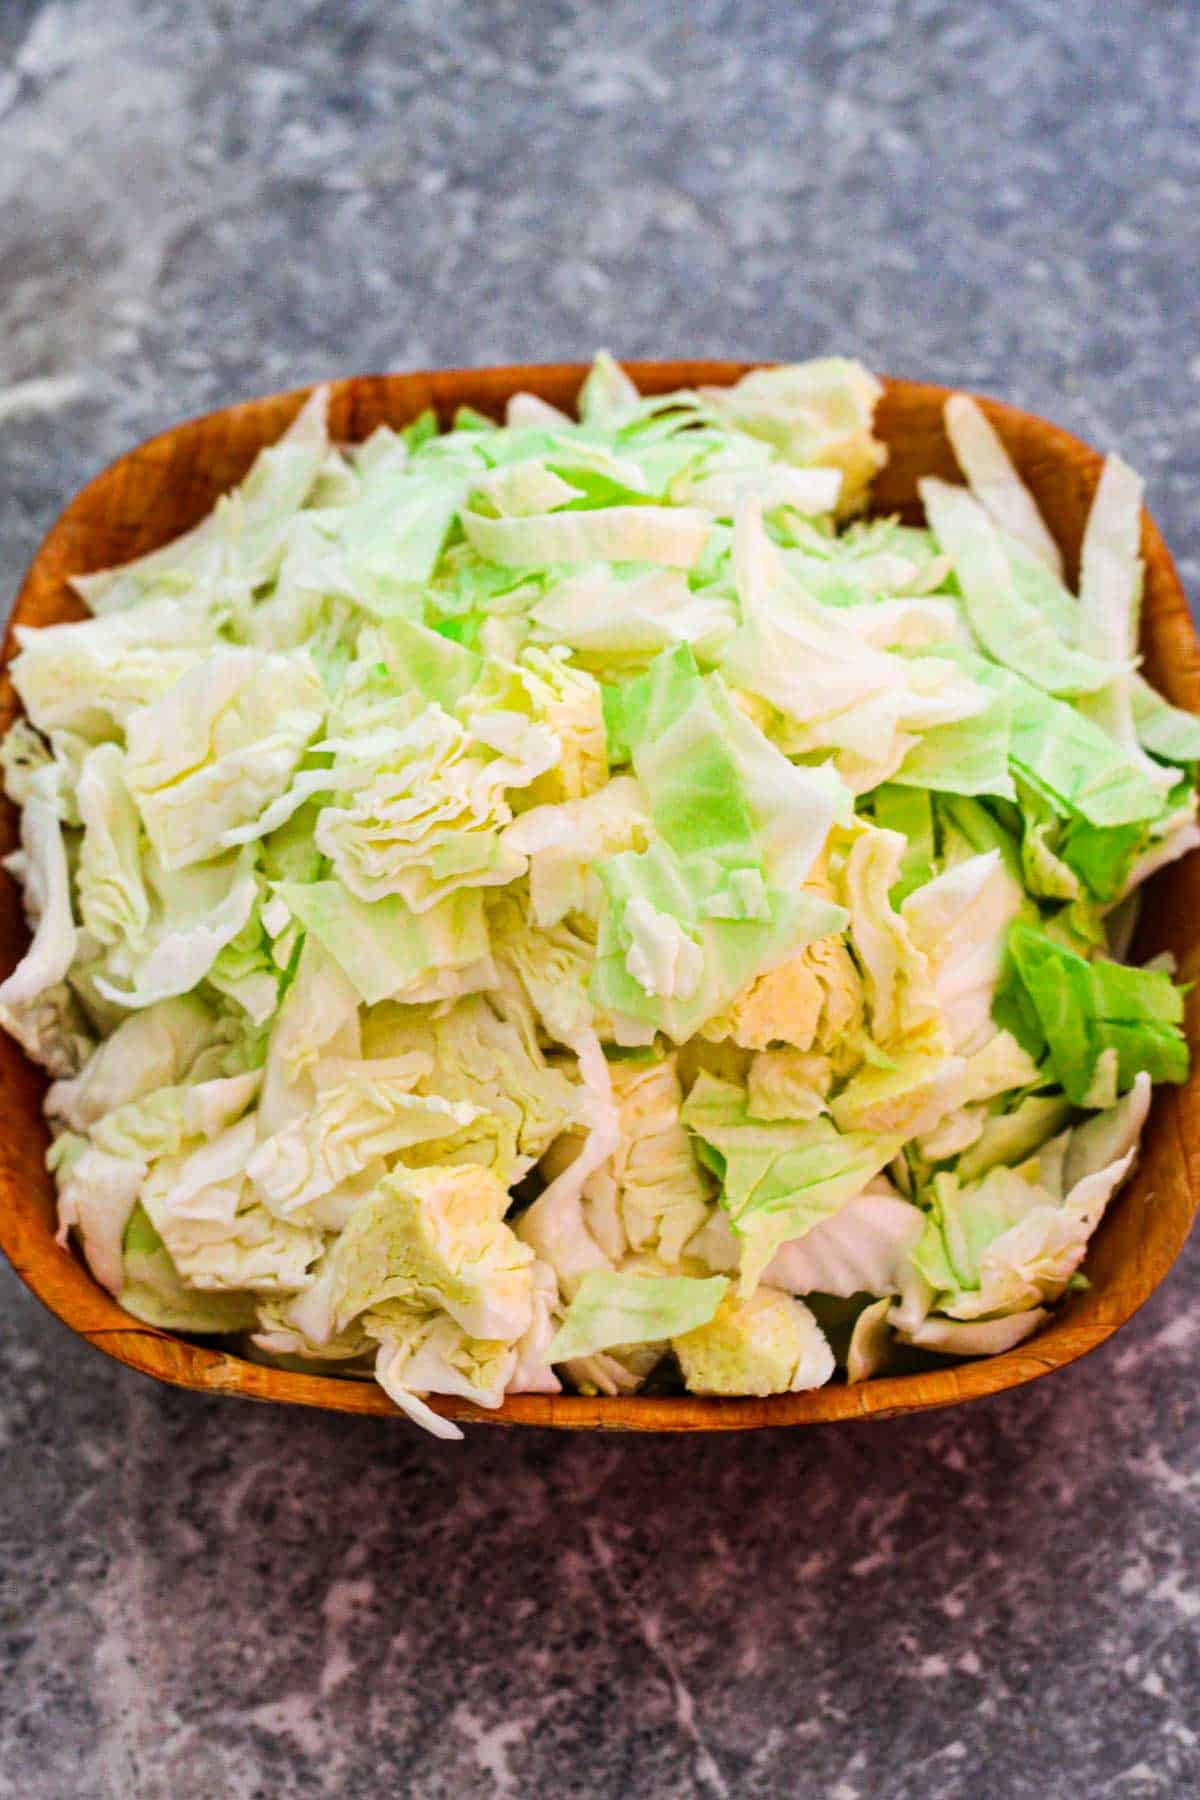 Roughly chopped cabbage in a square bowl.